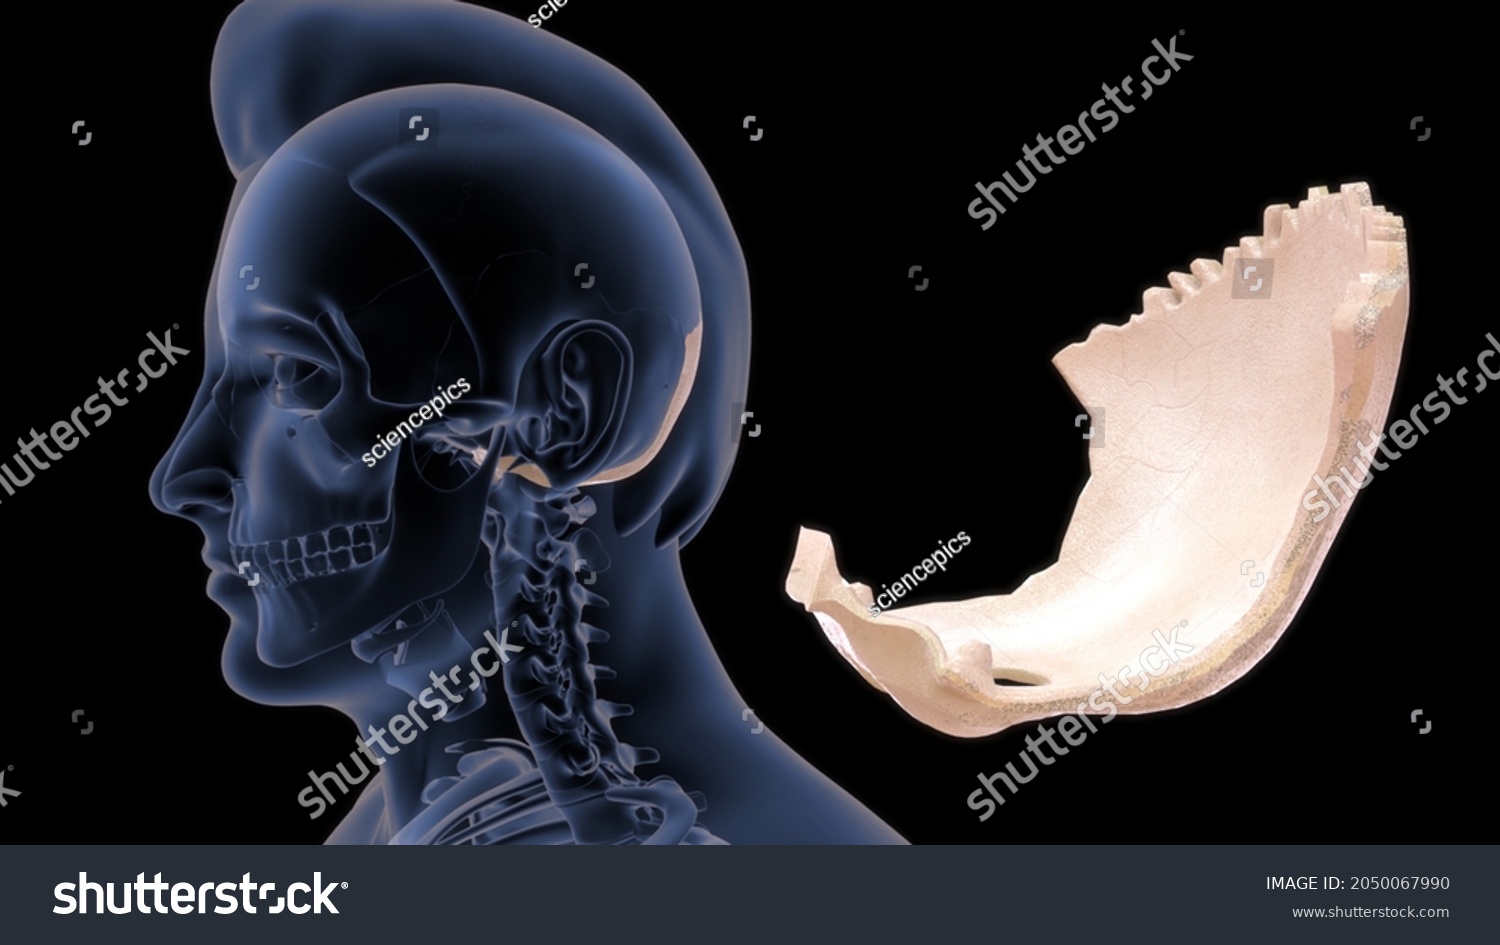 Occipital Stock Illustrations Images And Vectors Shutterstock 0717